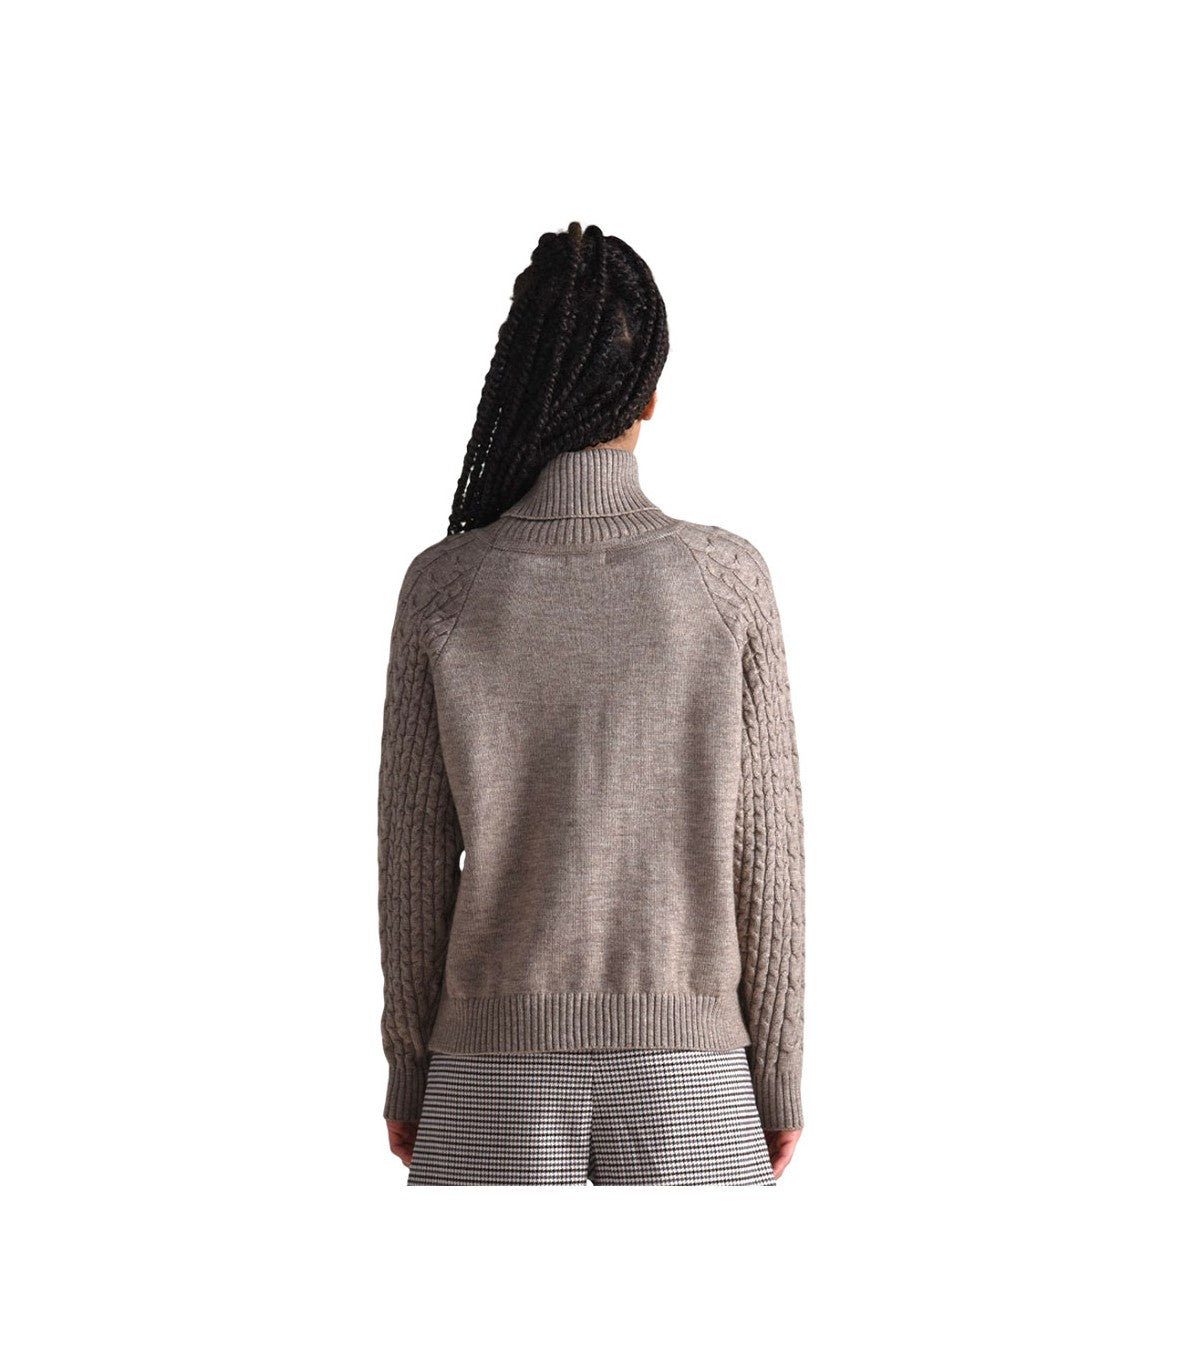 MOLLY BRACKEN HIGH NECK SWEATER WITH CABLES